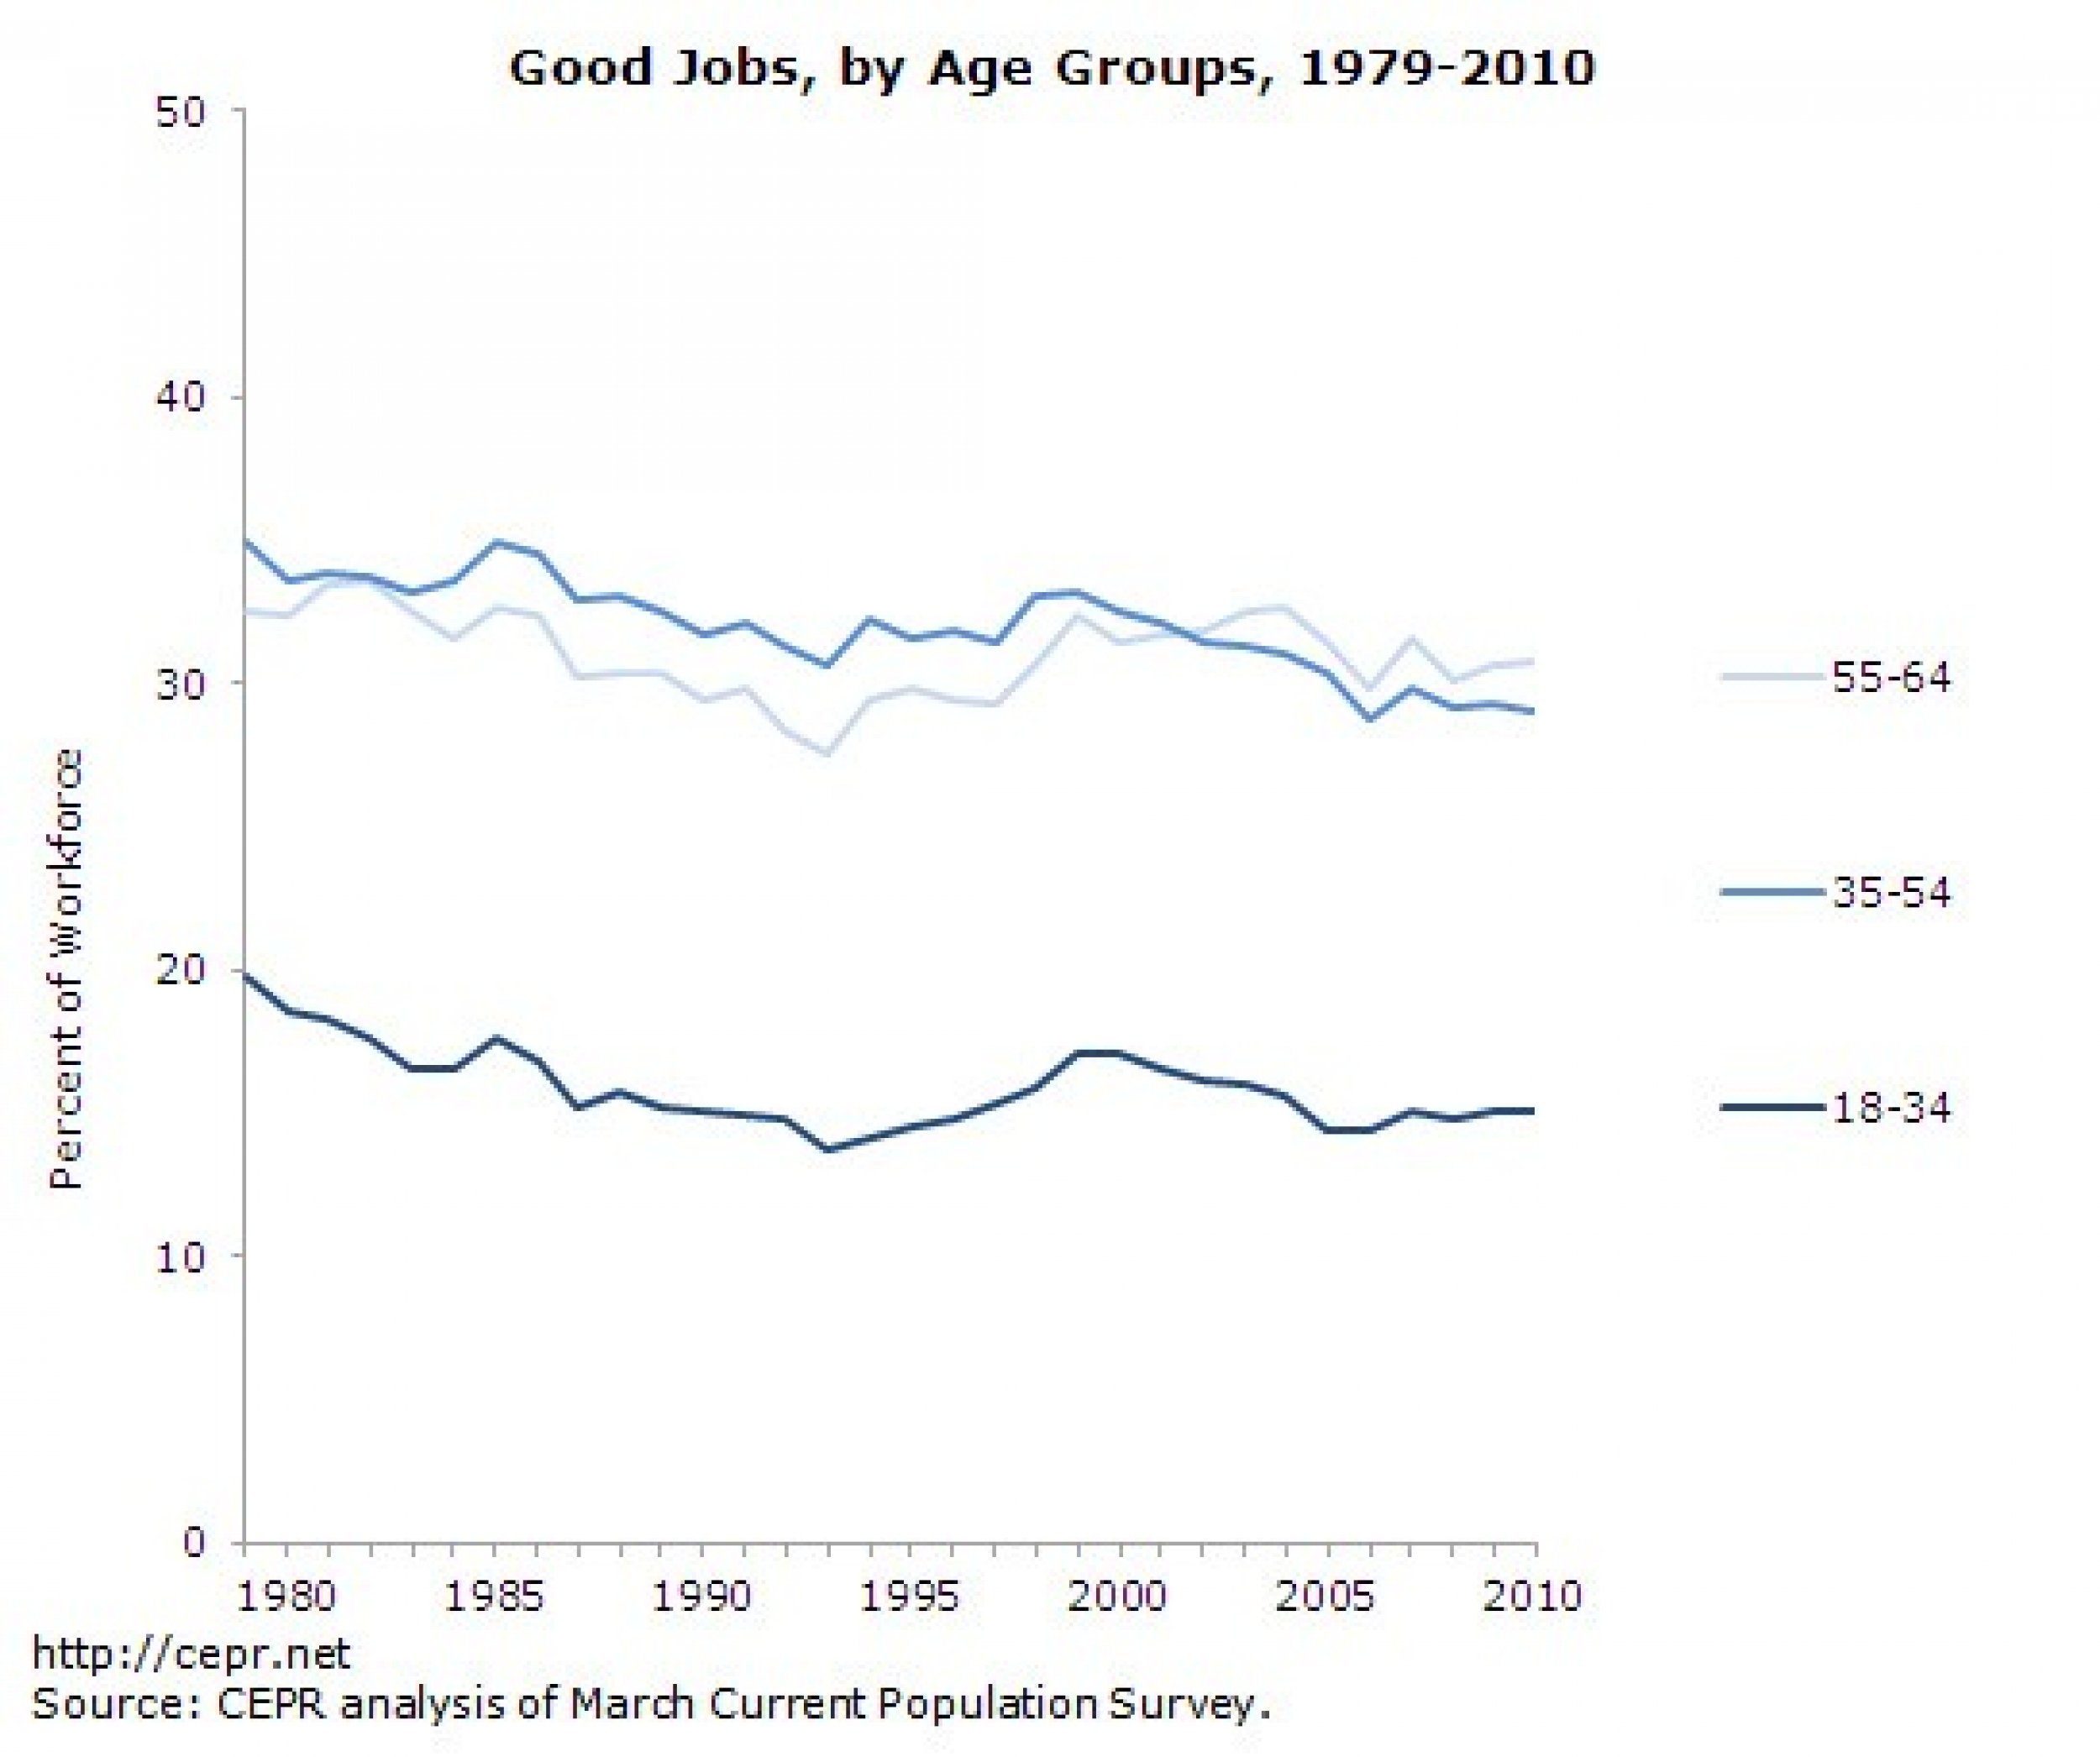 Good Jobs, by Age Groups, 1979-2010